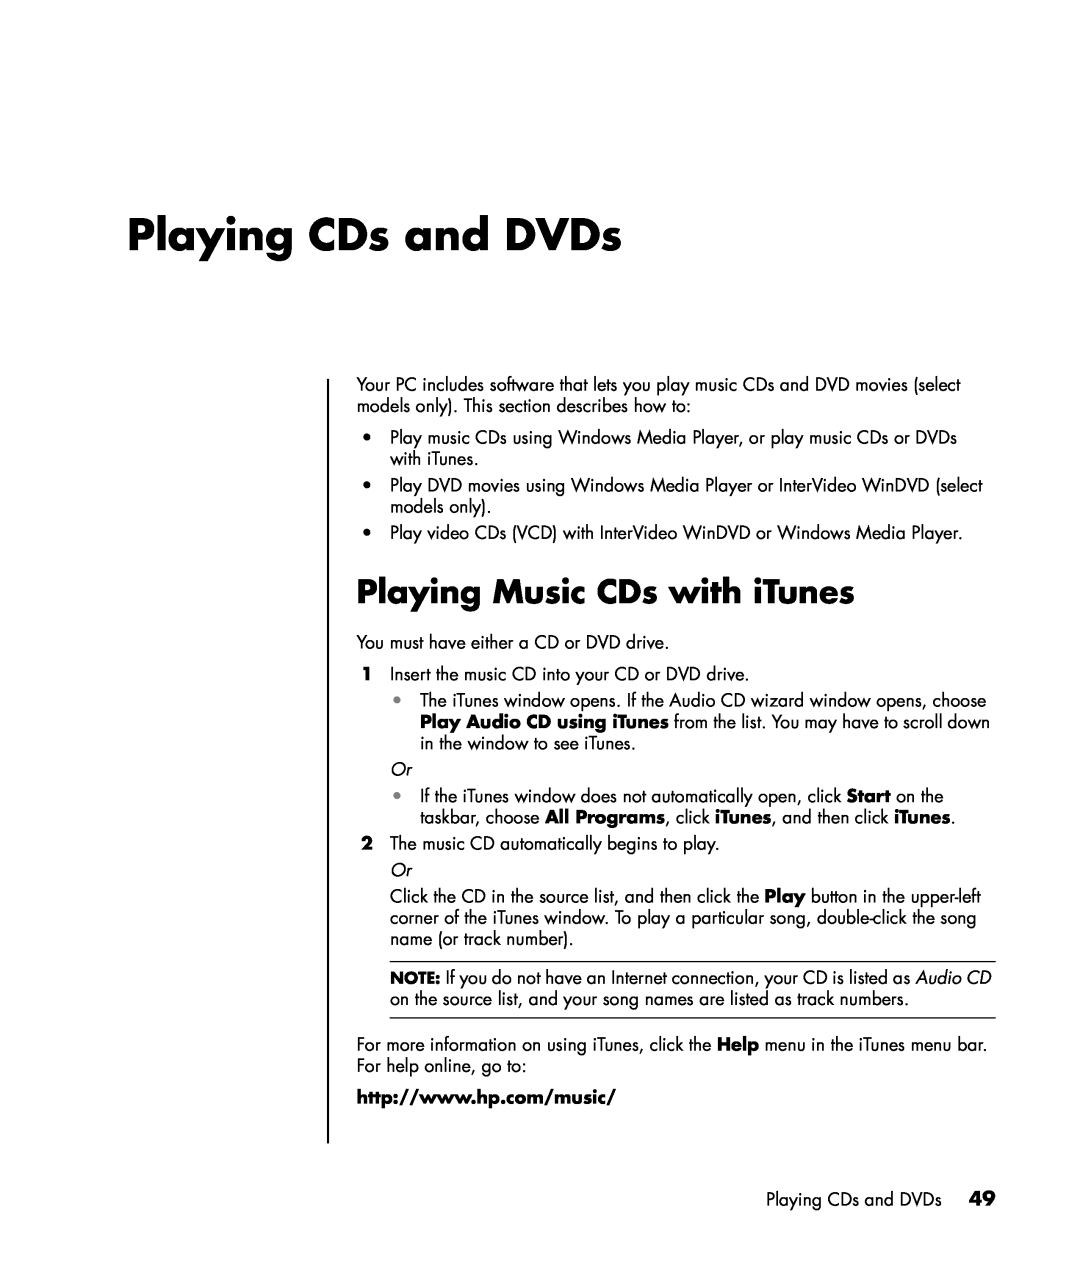 HP a1260a, a1265w, a1257c, a1245c, a1240n, a1230n, a1224n, a1226n, a1206n Playing CDs and DVDs, Playing Music CDs with iTunes 